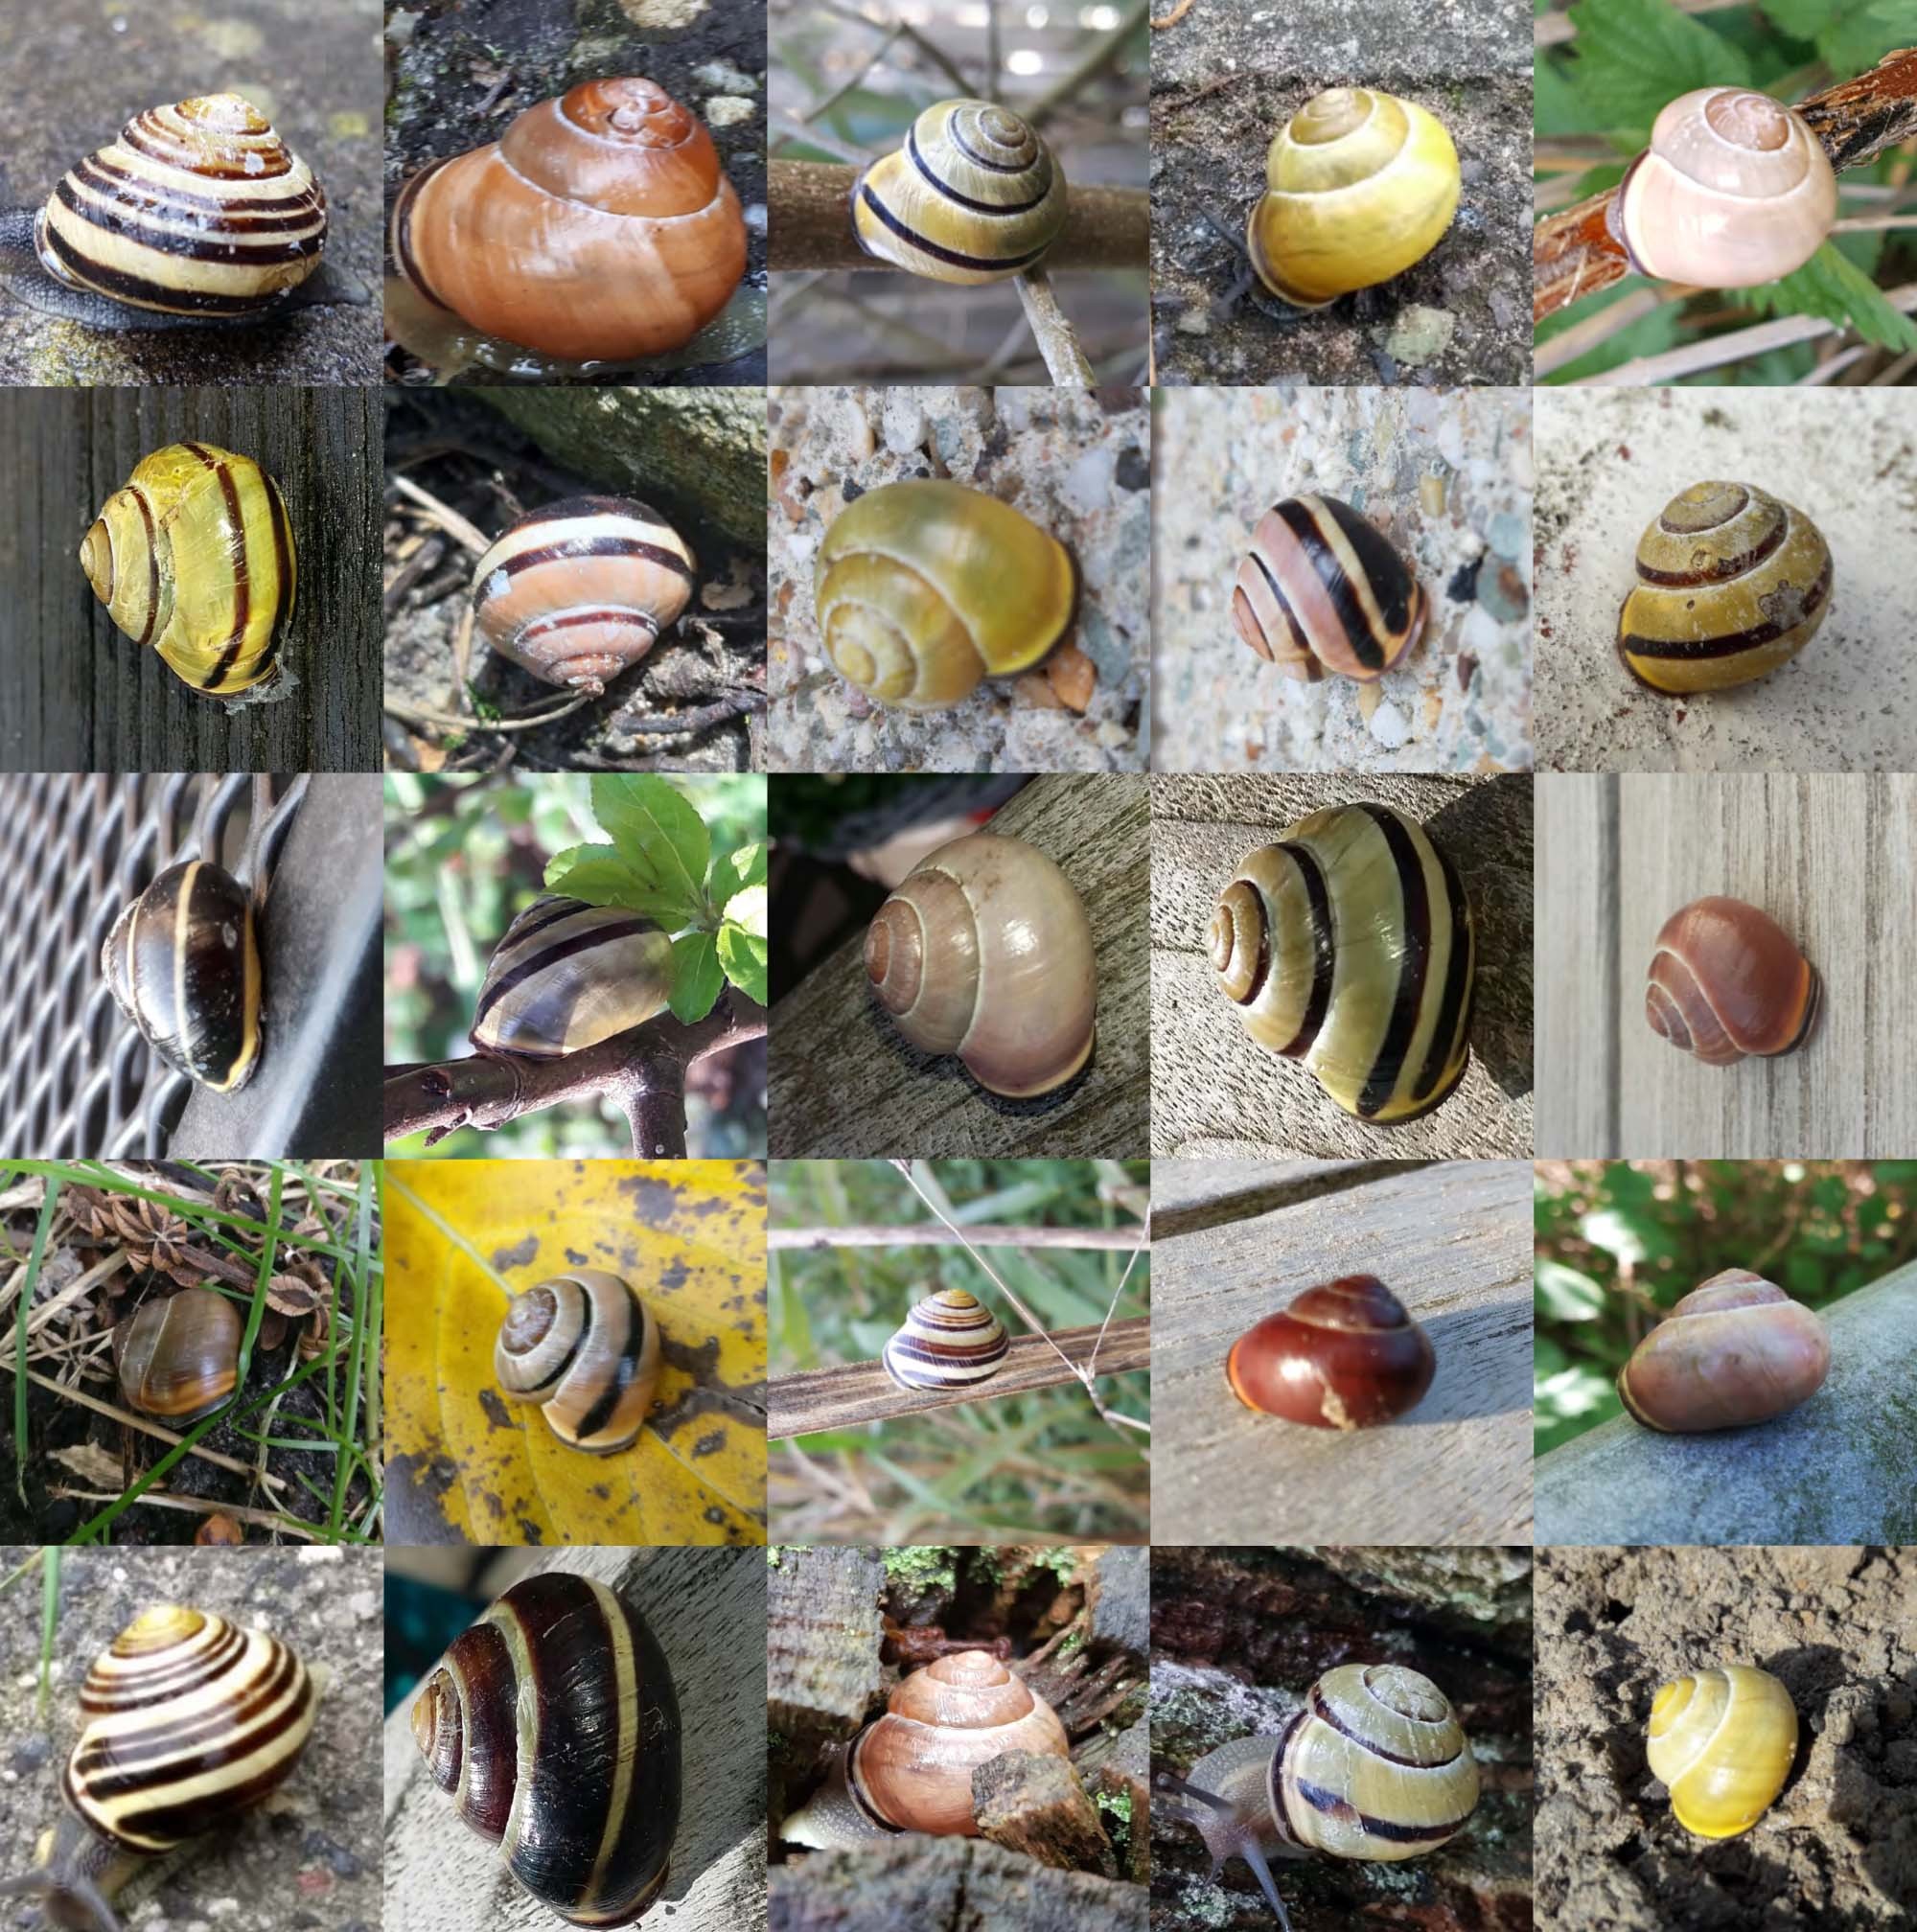 Snail Shell Colour Evolution In Urban Heat Islands Detected Via Citizen Science Communications Biology